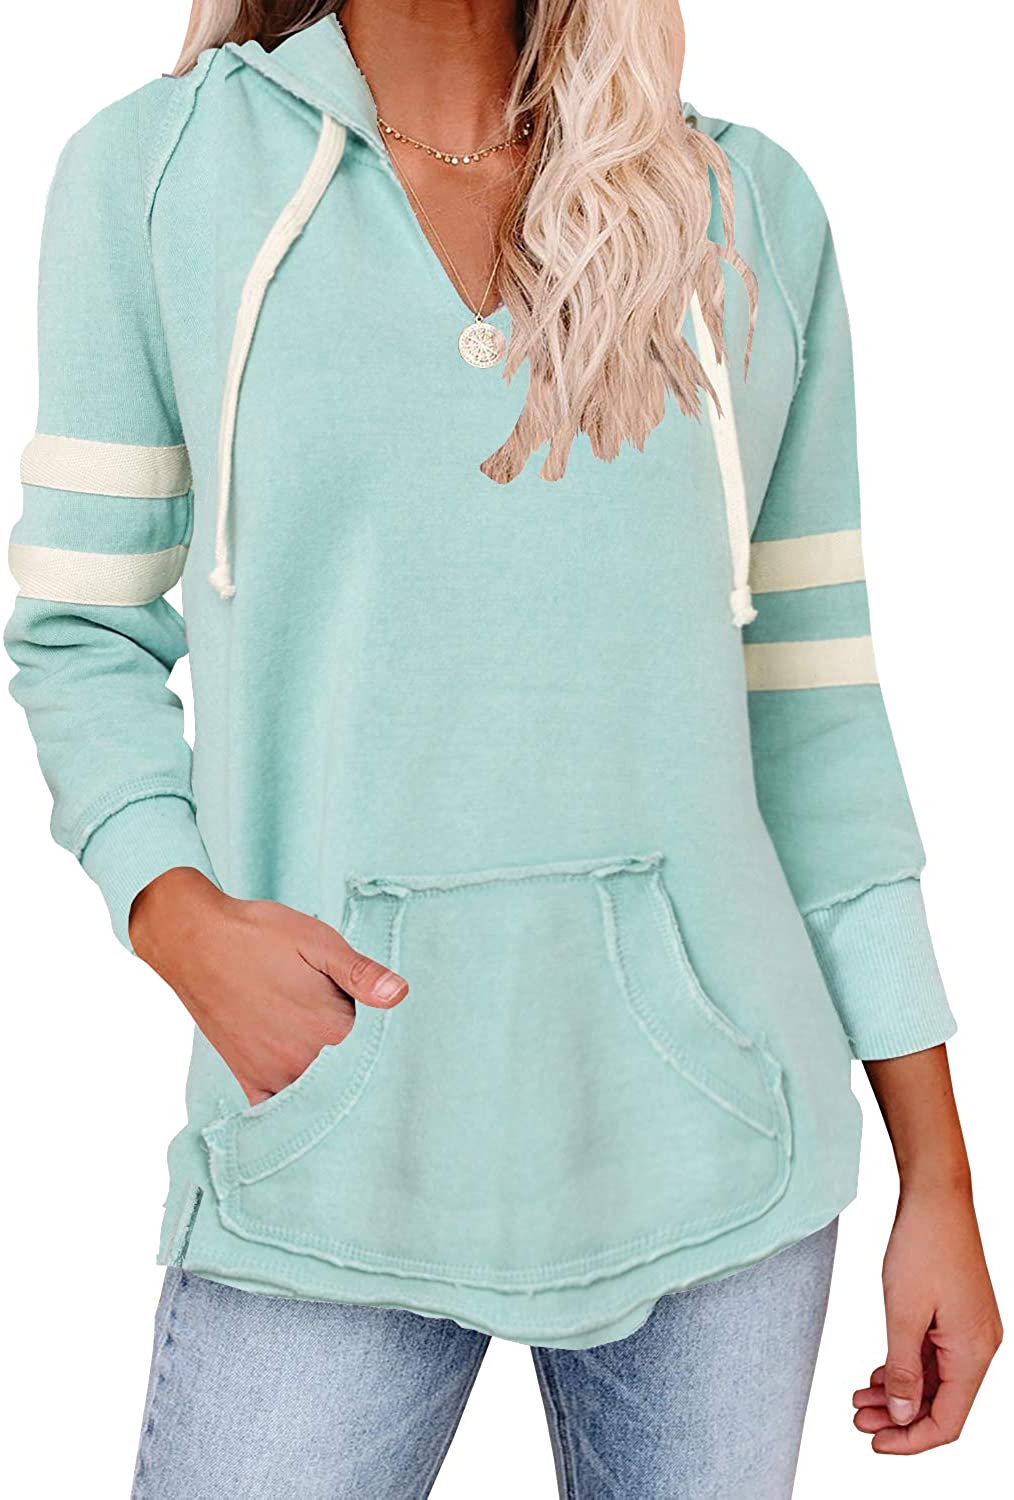 Cyanstyle Womens Long Sleeve V Neck Hoodie Sporty Pullover Striped Sweatshirt with Pocket 